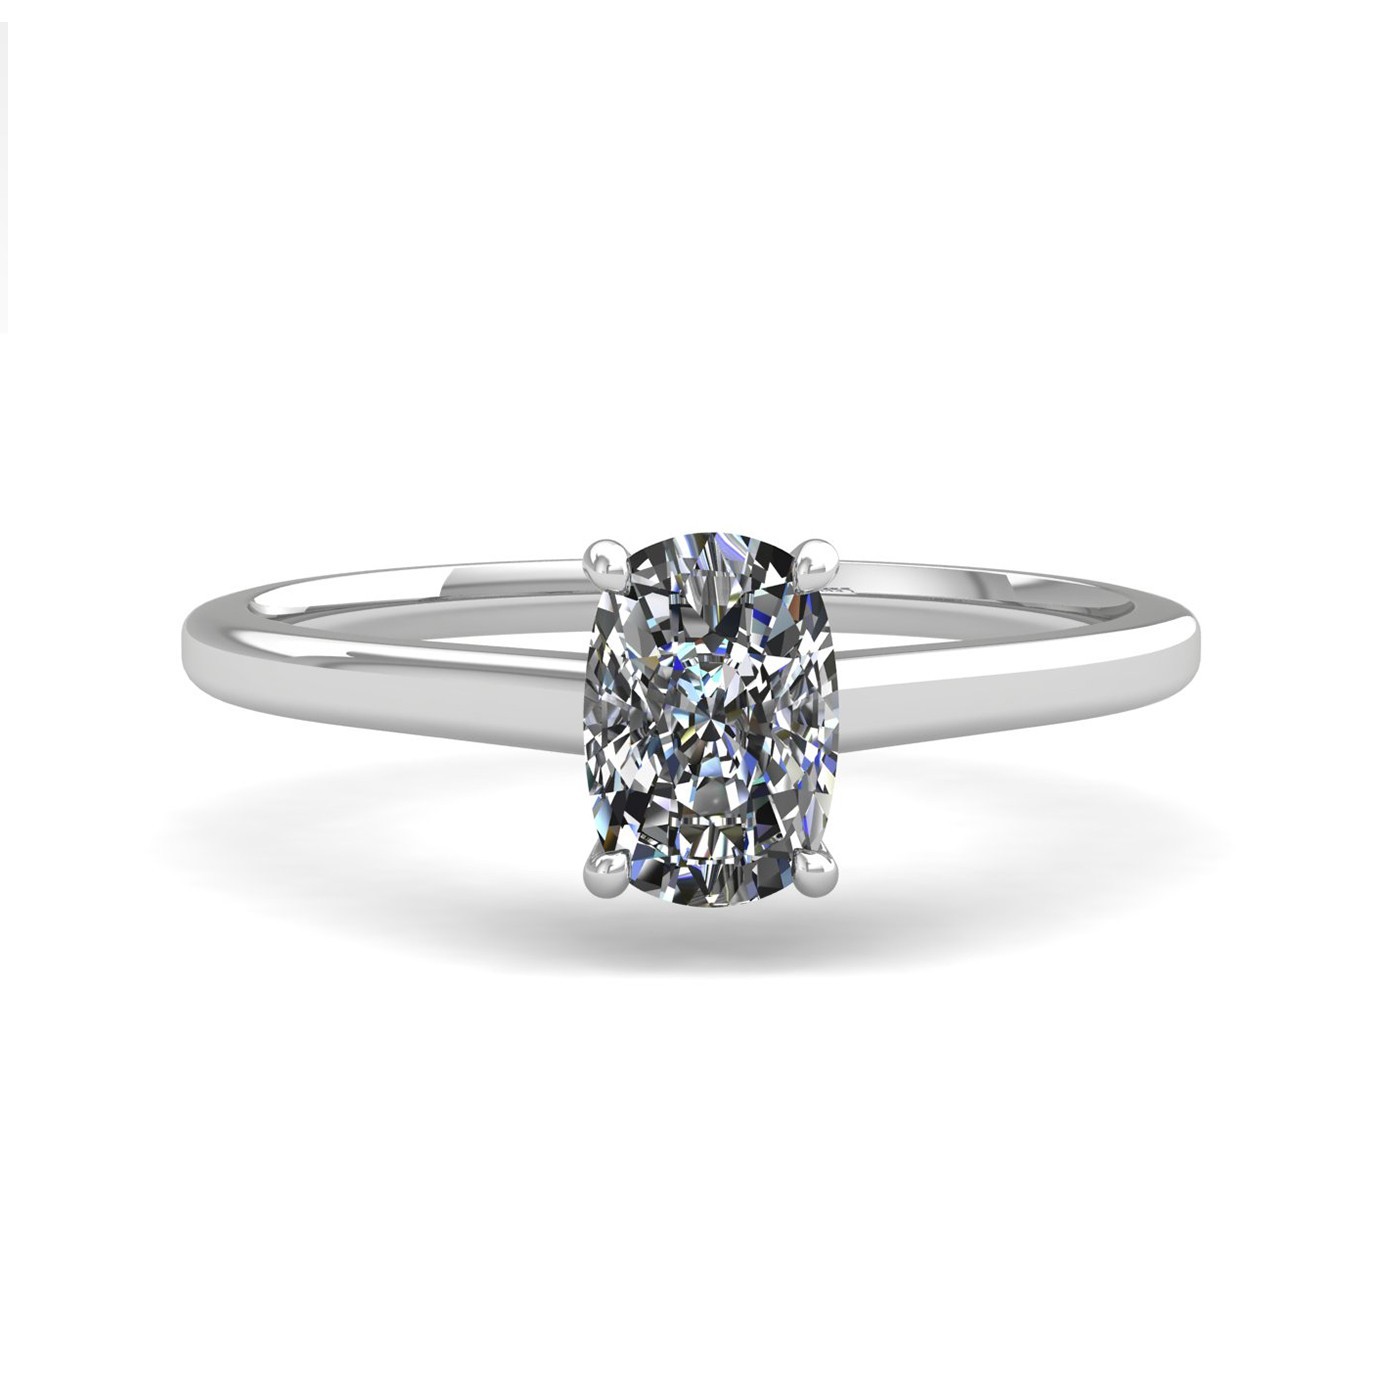 18k white gold 1,20 ct 4 prongs solitaire elongated cushion cut diamond engagement ring with whisper thin band Photos & images